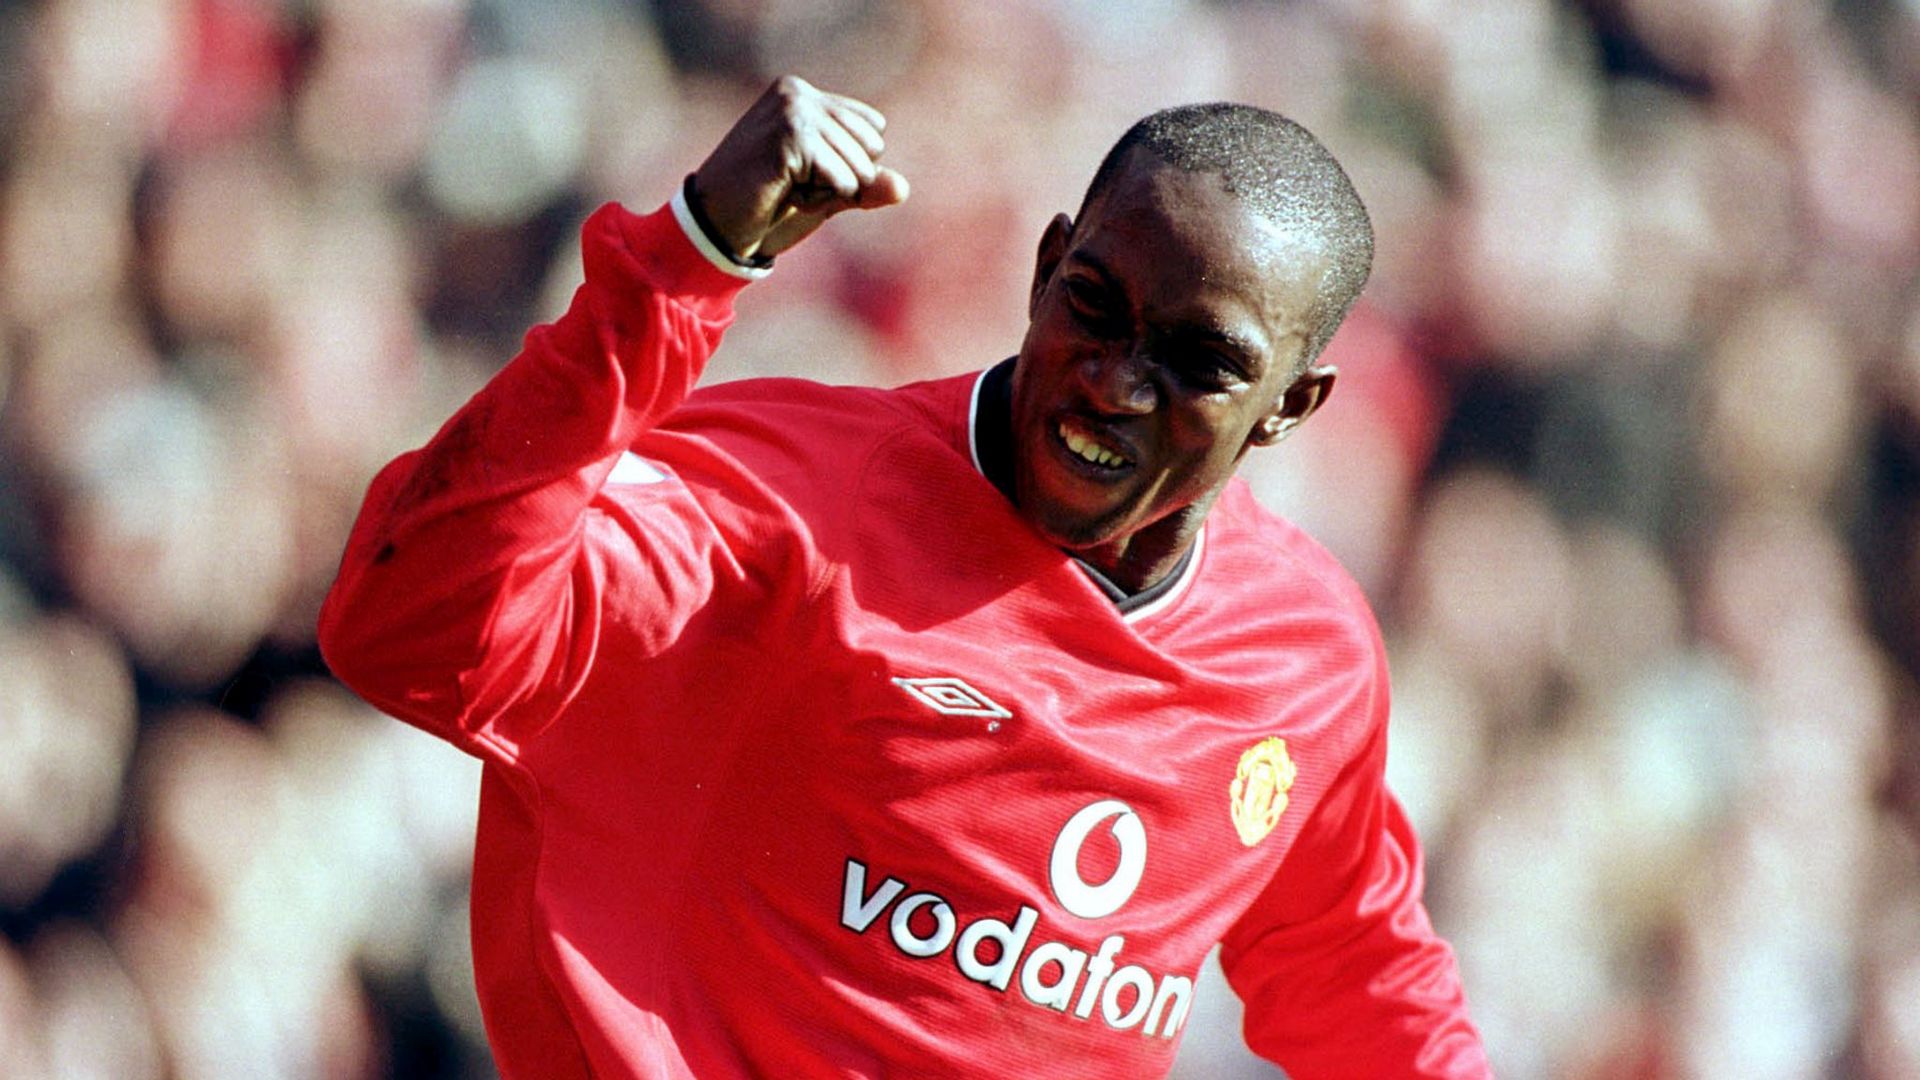 Dwight Yorke fastest goal vs Coventry City (12.16 seconds)